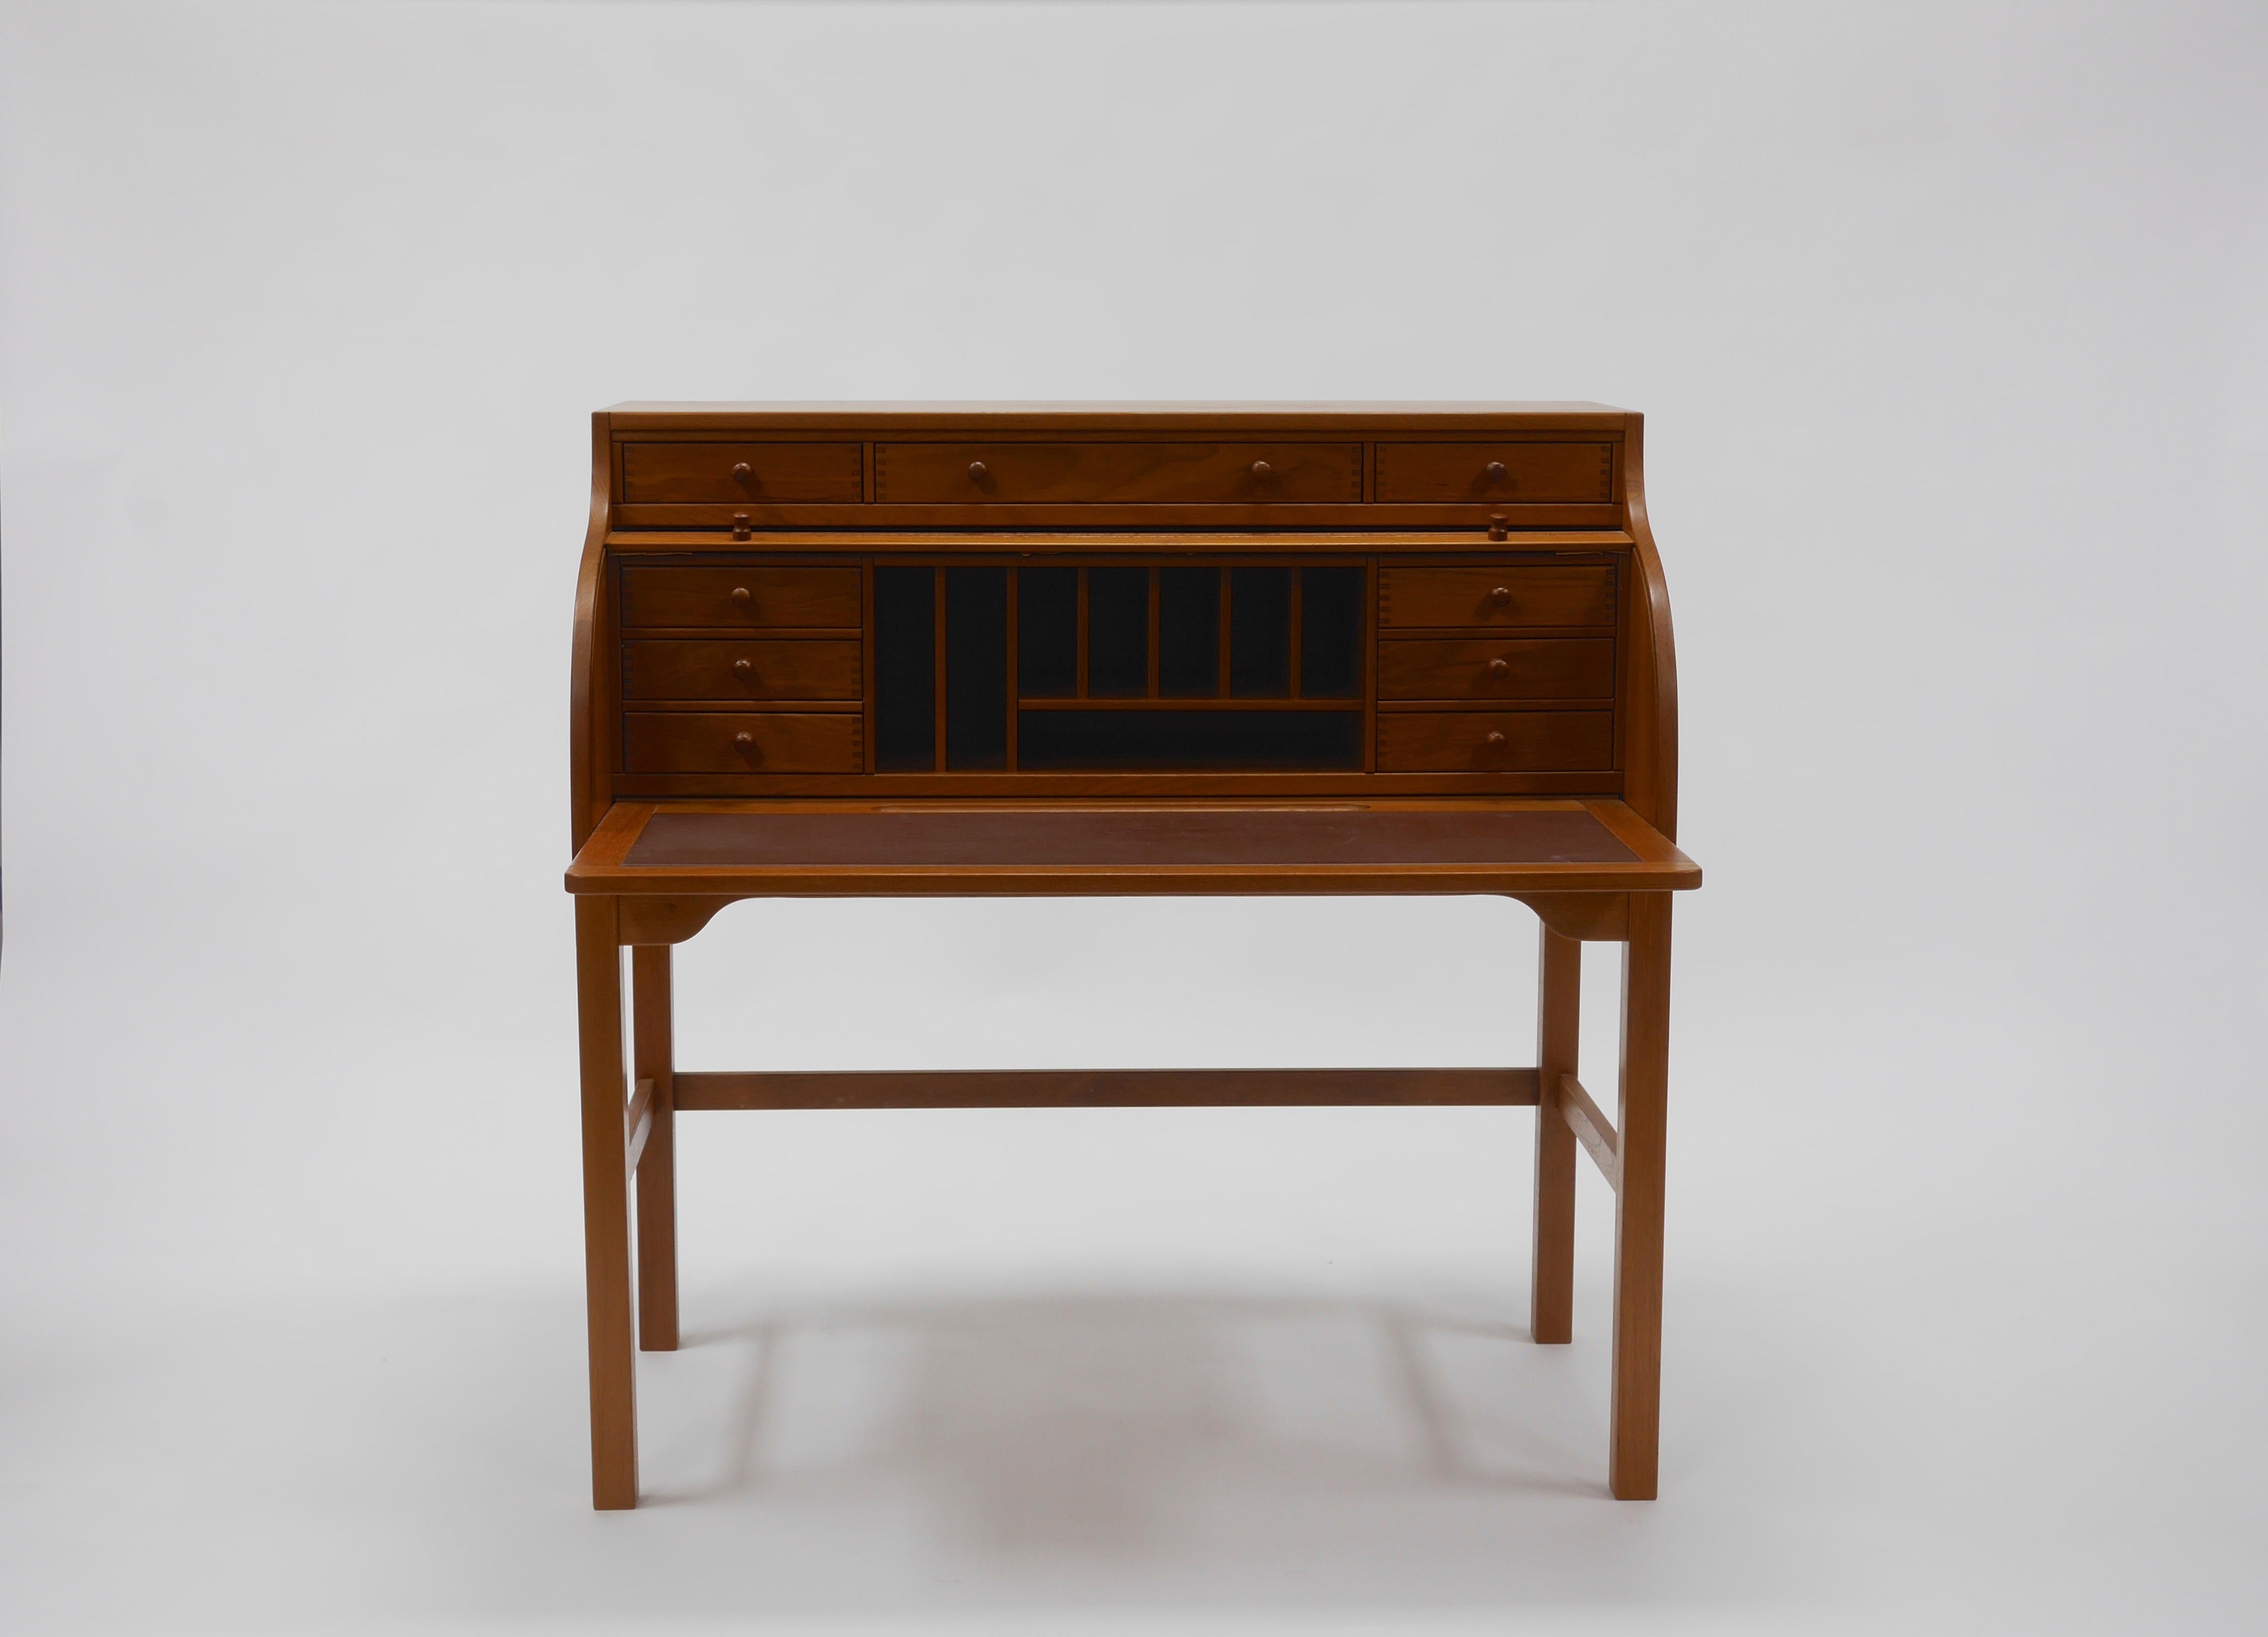 Andreas Hansen roll top teak desk, manufactured by Form75 in Hadsten, Denmark.
Featuring a locking tambour roll top concealing a fitted superstructure and a pullout / pull-out leather writing surface. 

Measures: 44